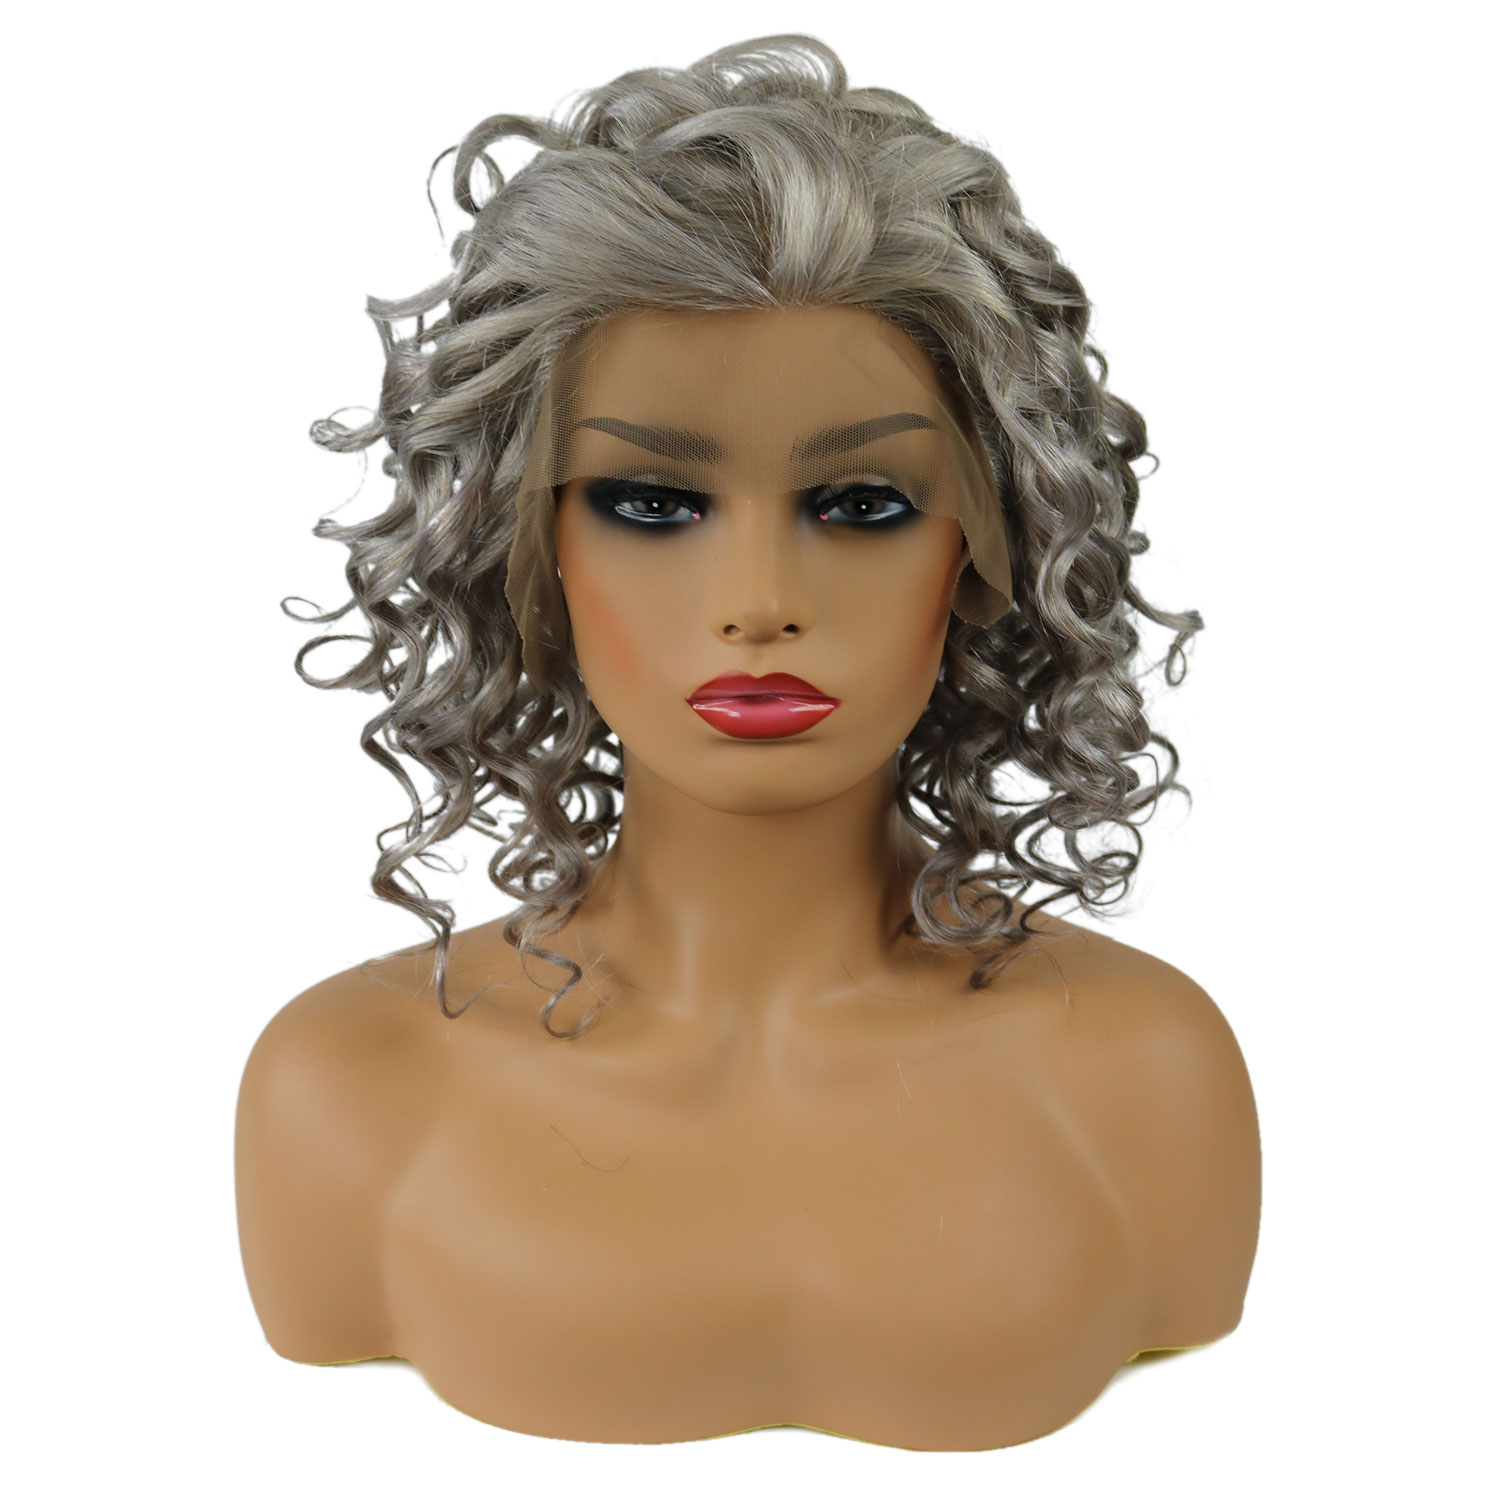 Salt and Pepper Wigs Curly Human Hair Women Lace Front Cap 120% 14 Inches Wigs